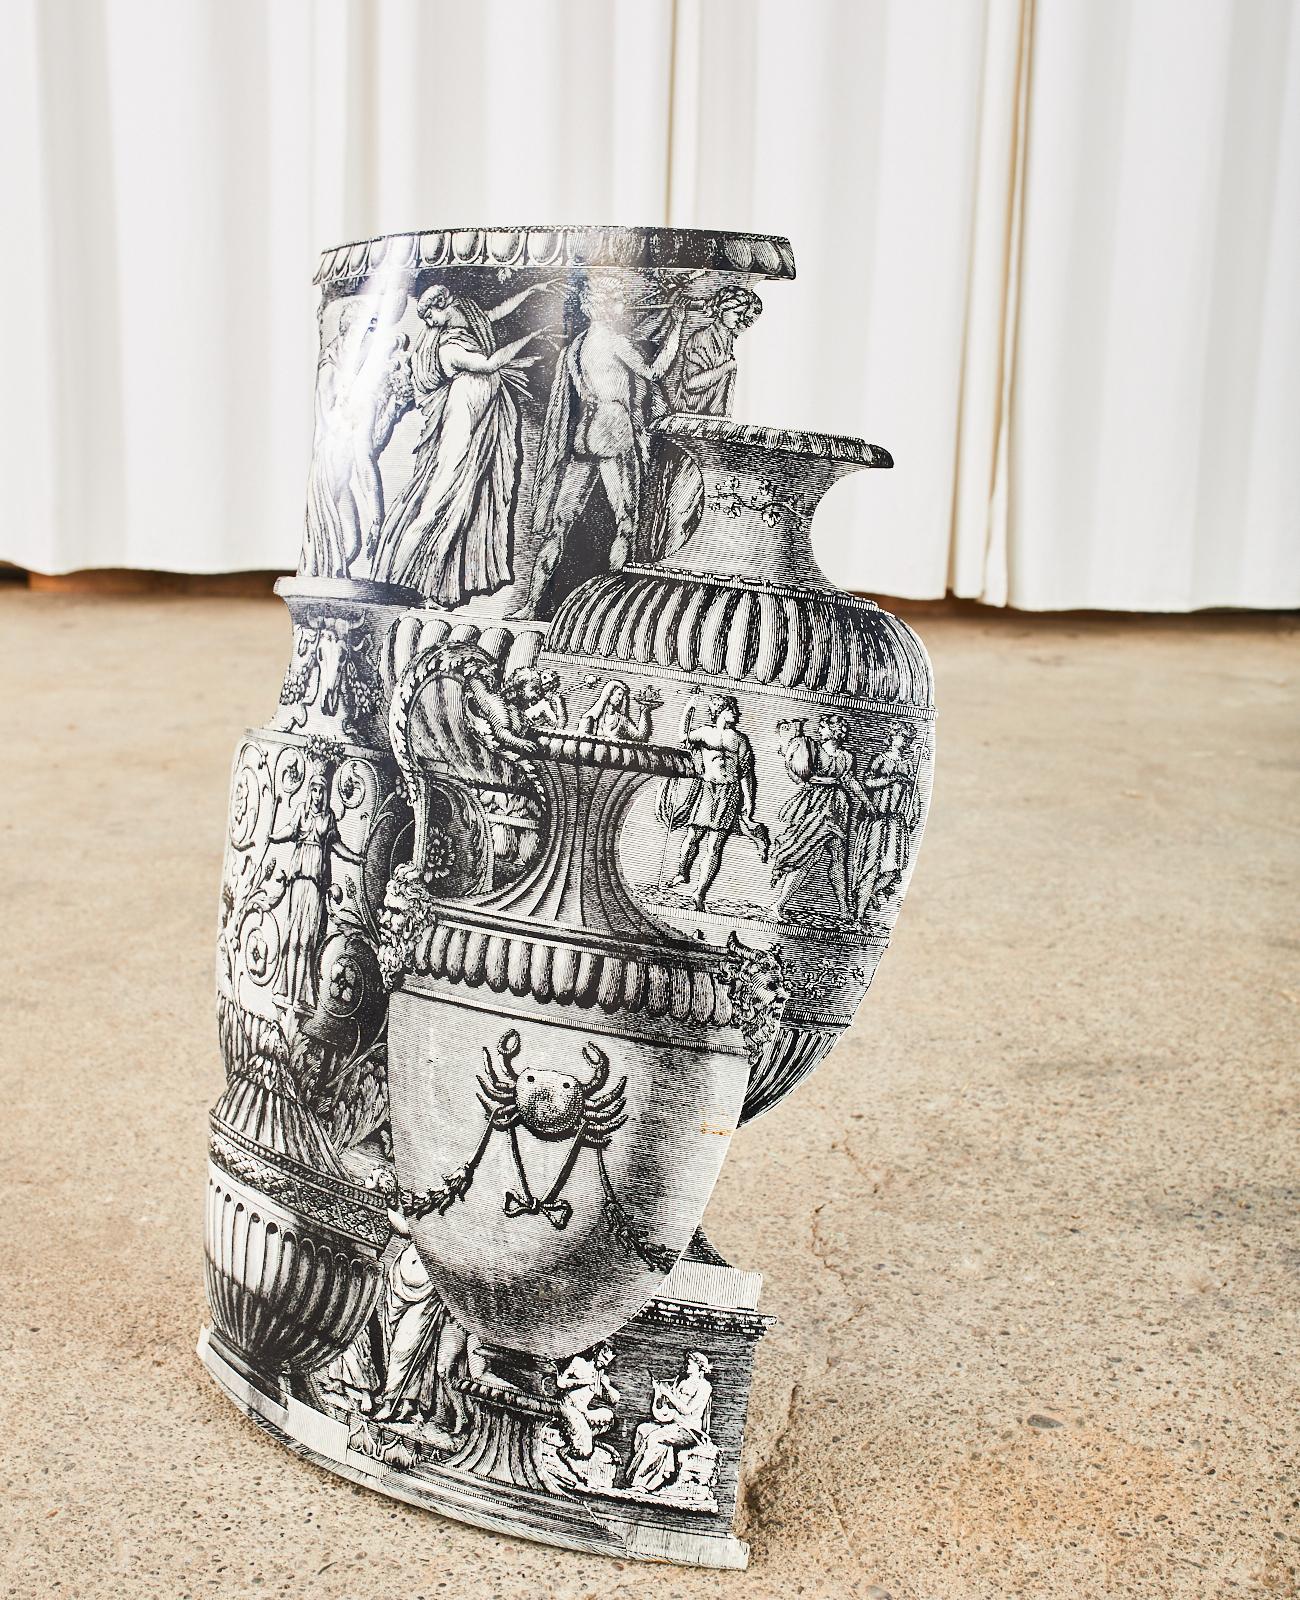 Sublime Piero Fornasetti umbrella stand crafted from hand silk screened and lacquered metal. Trompe l'oeil vasi antichi or antique vases features Greco-Roman decorated vases in a curved 3-D artwork. Original tags from I. Magnin in San Francisco and